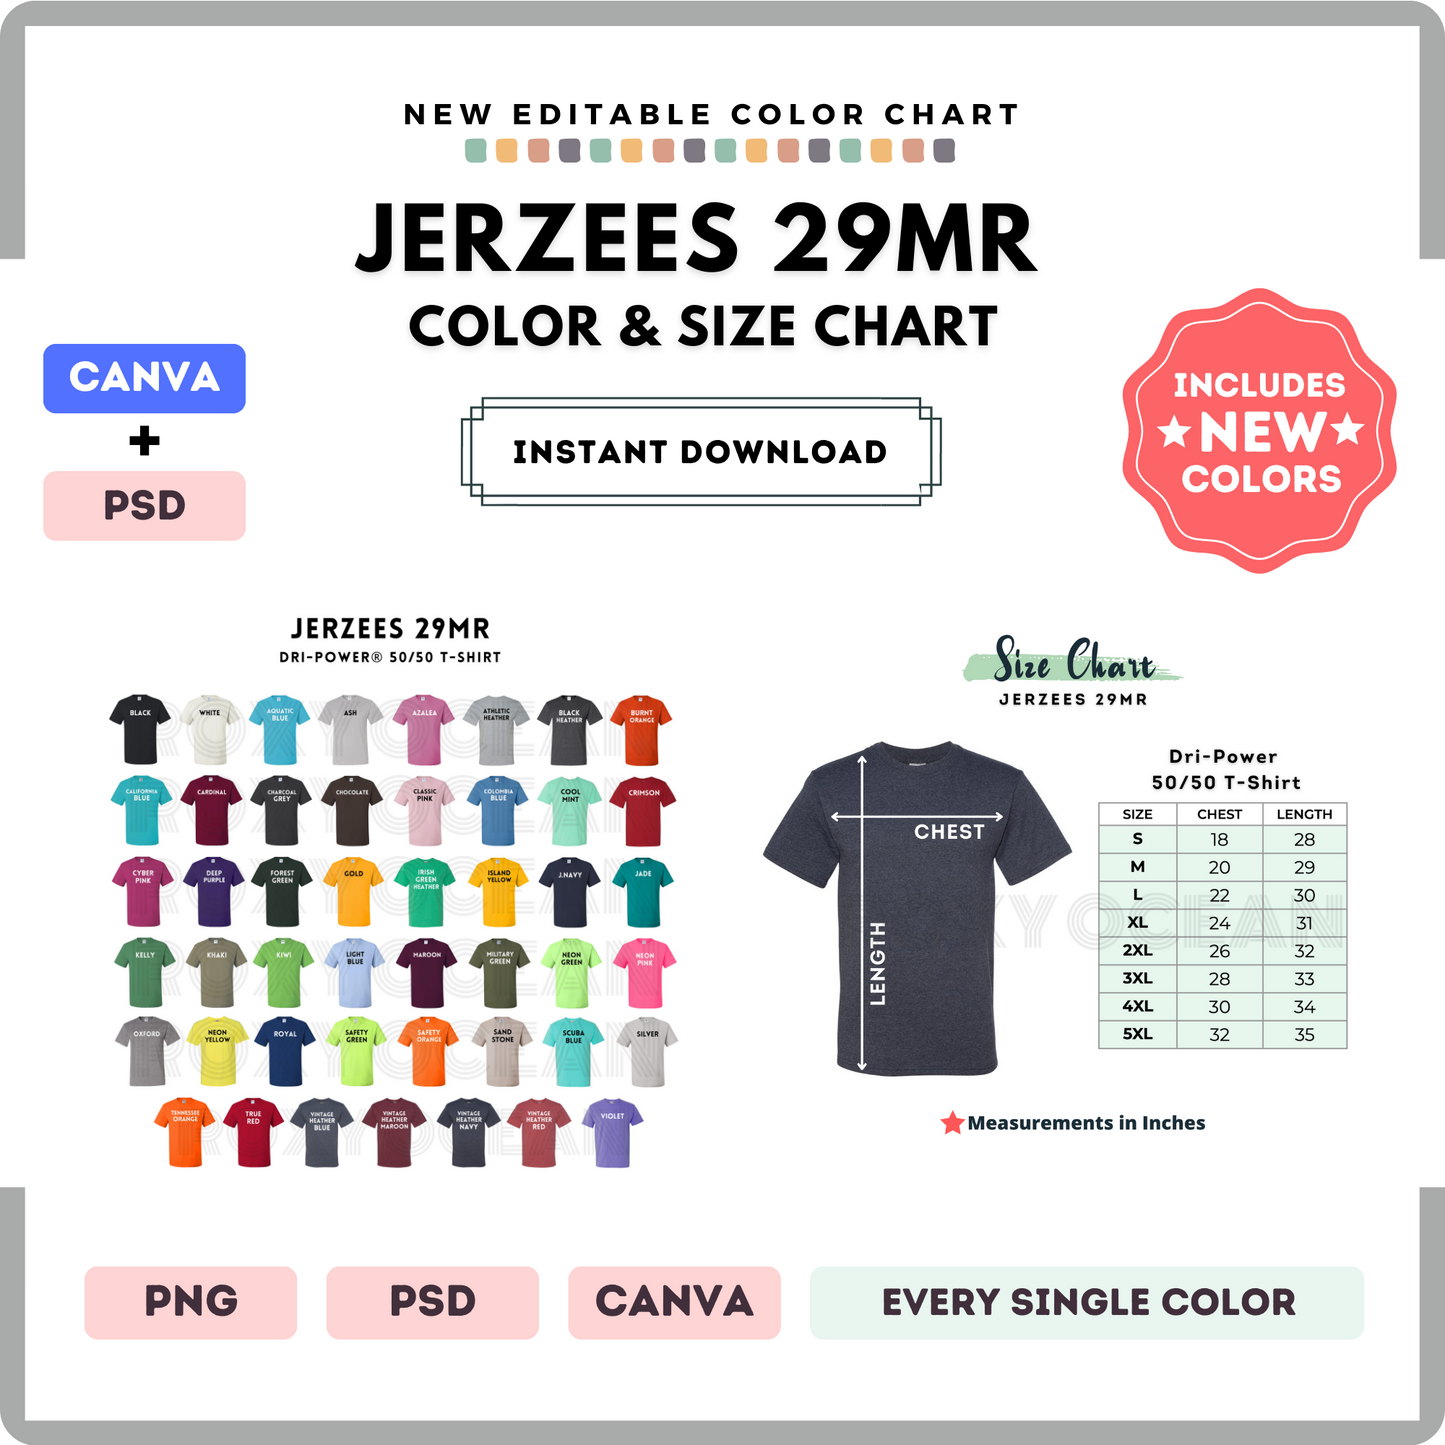 Jerzees 29MR Color and Size Chart